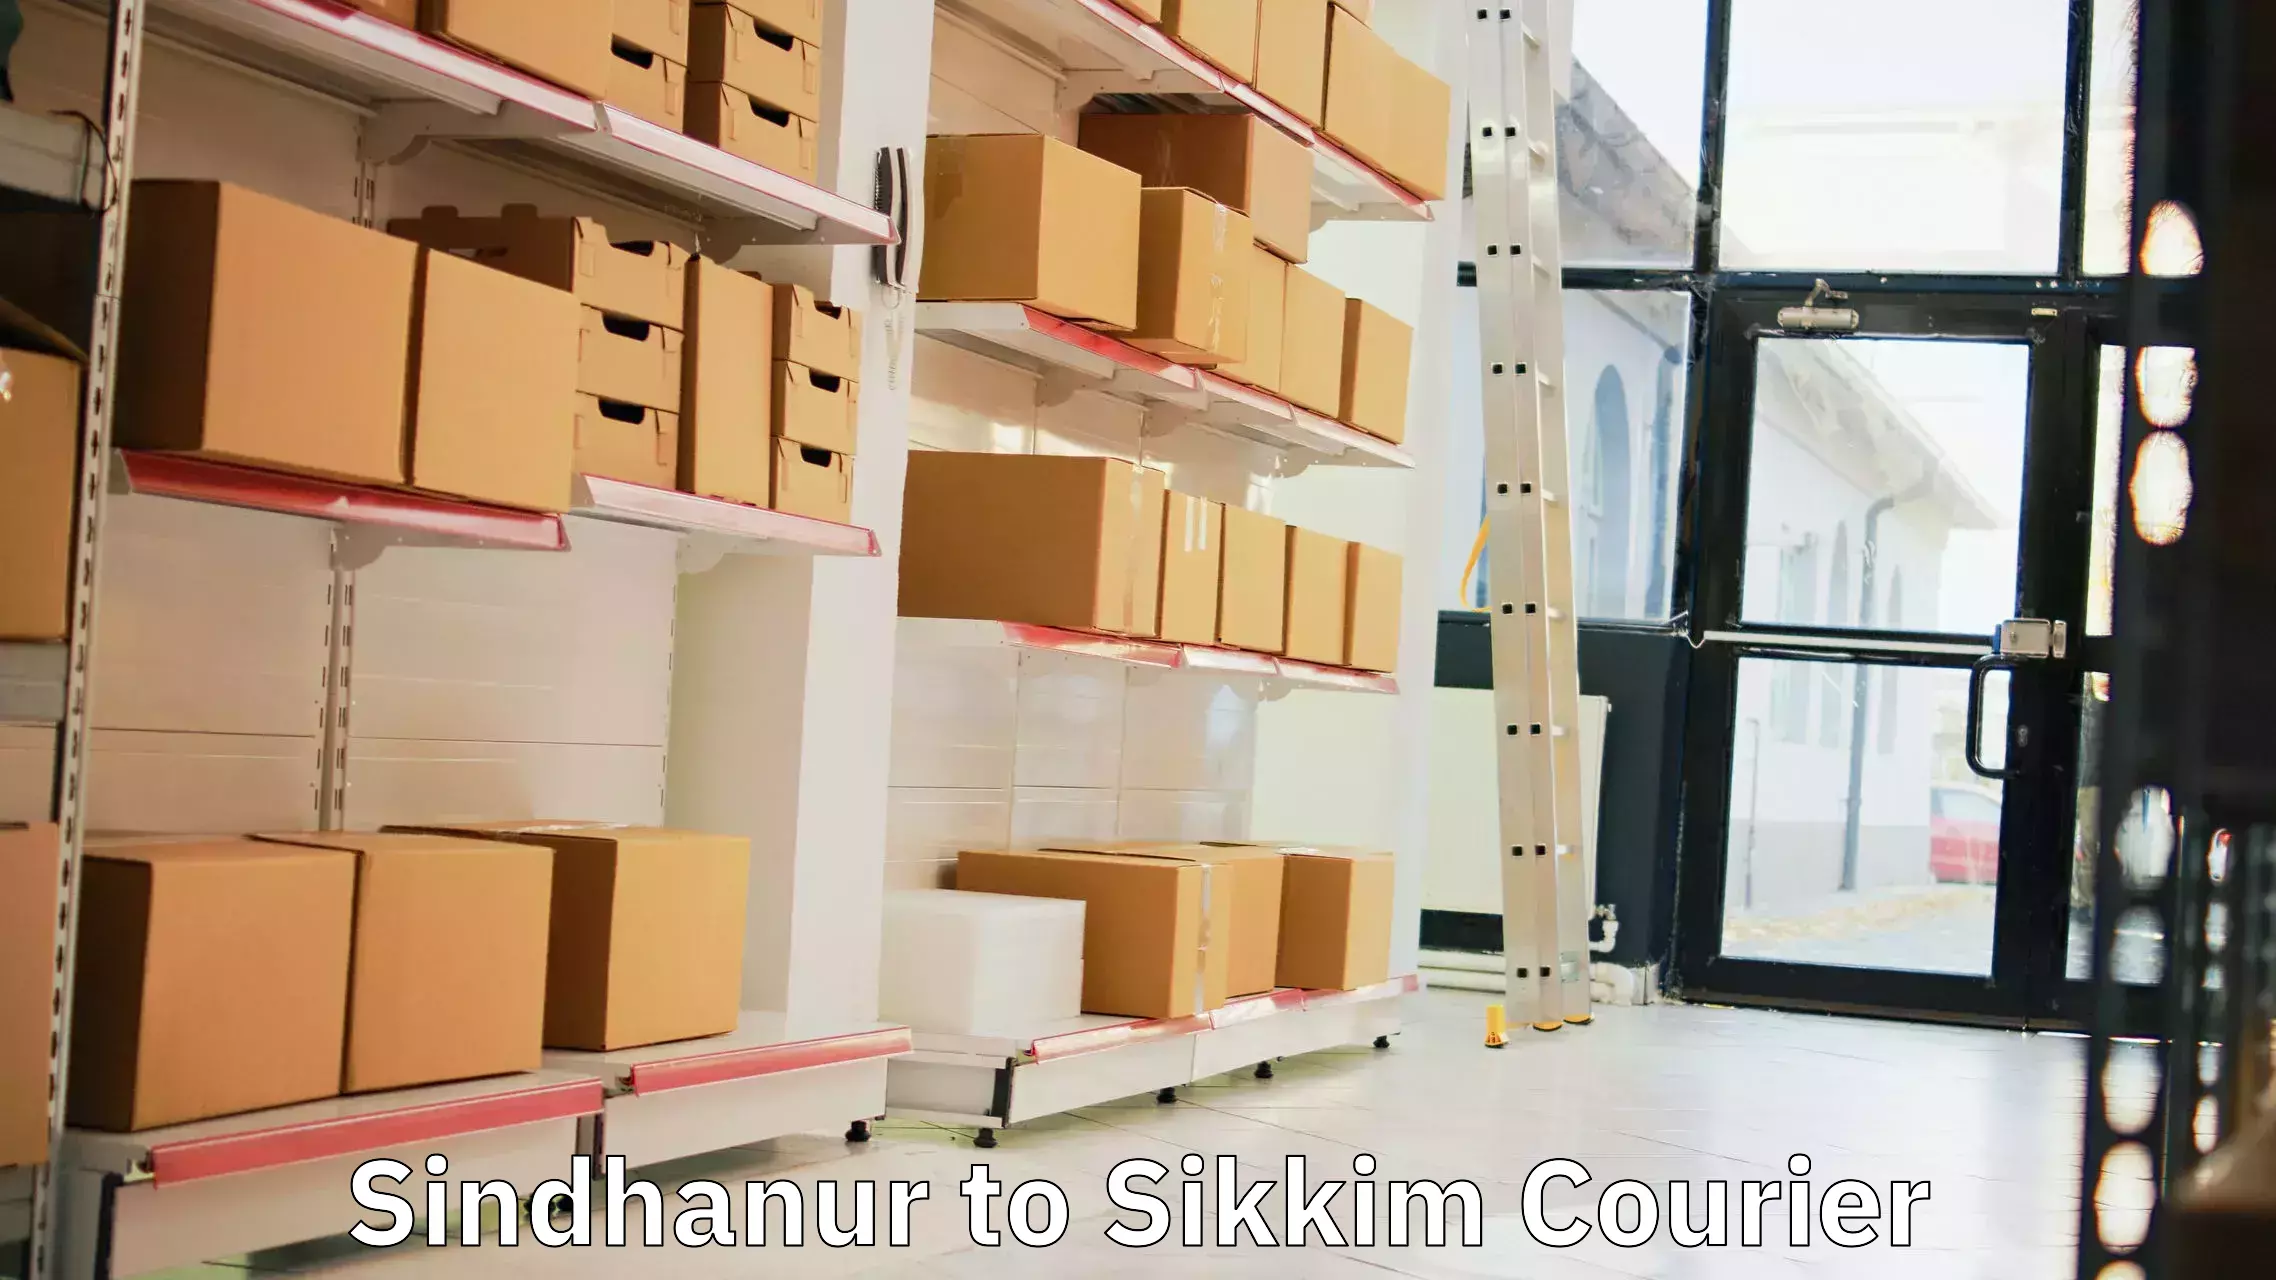 Sustainable shipping practices Sindhanur to North Sikkim